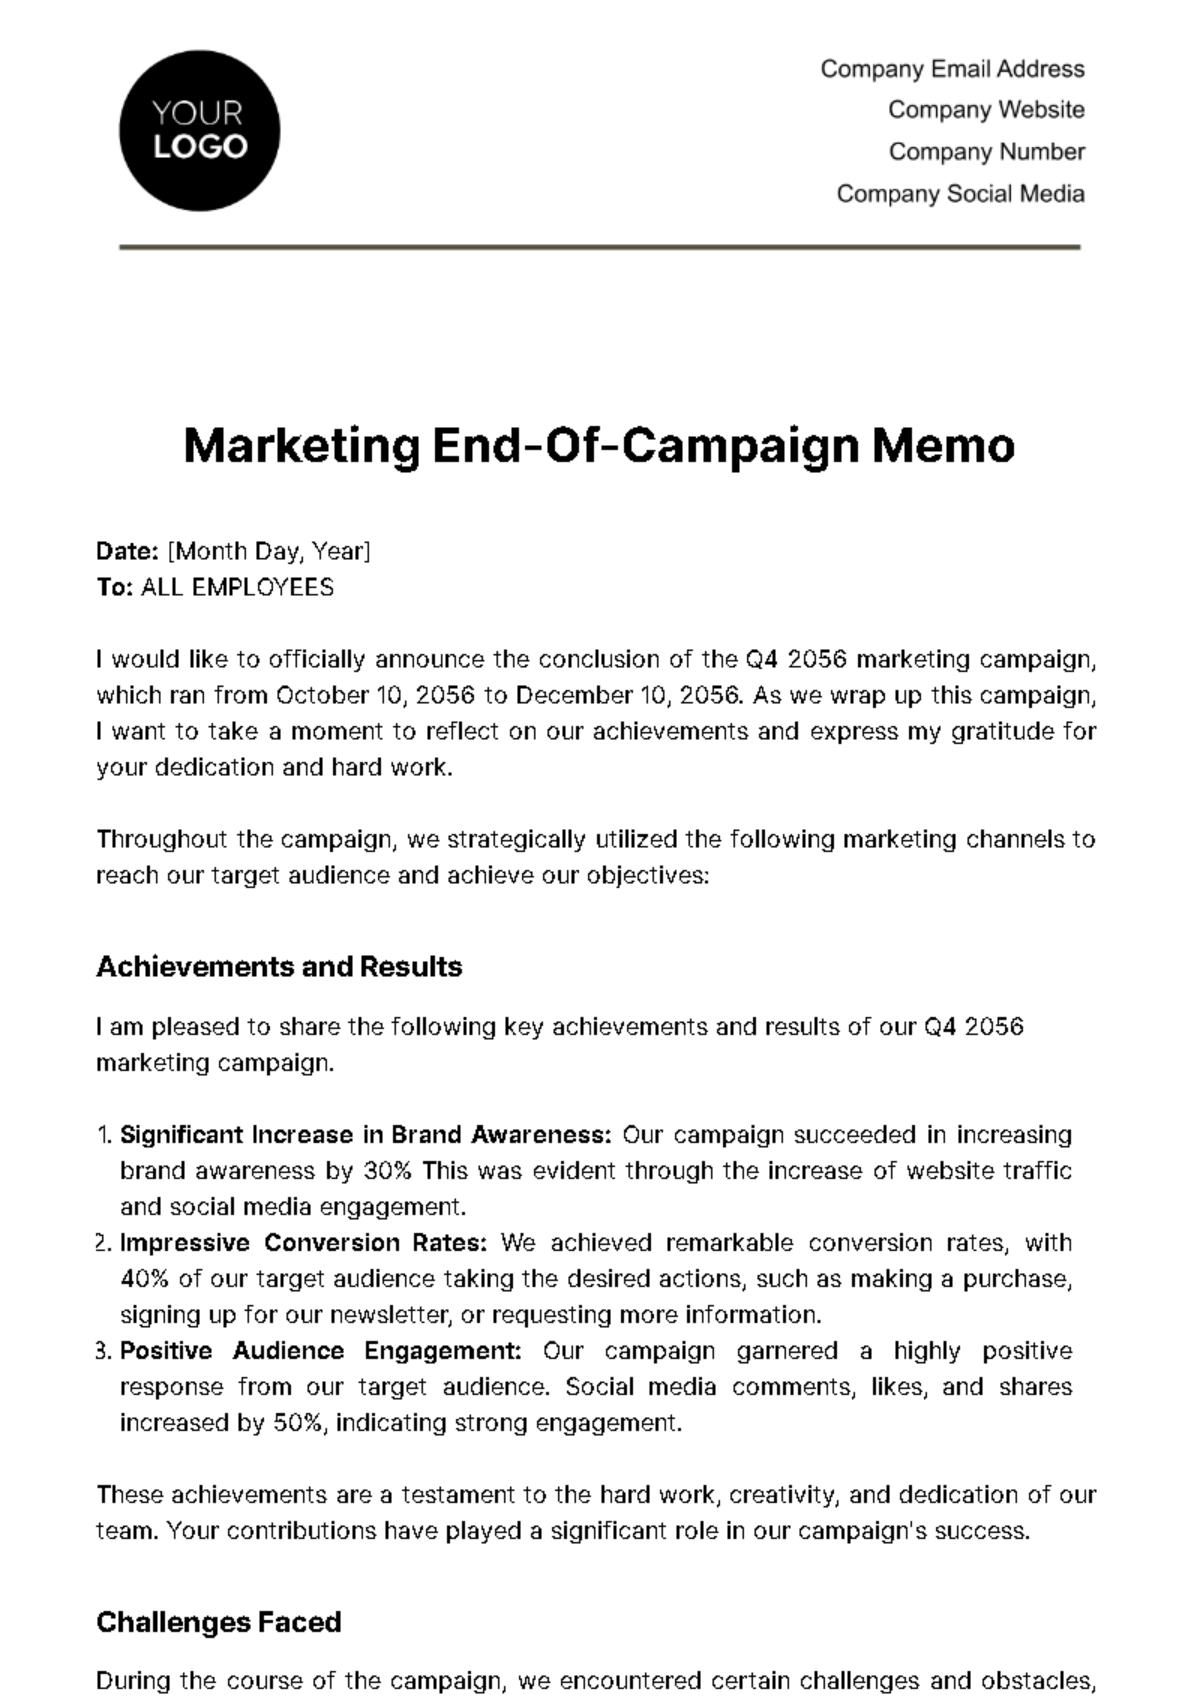 Marketing End of Campaign Memo Template